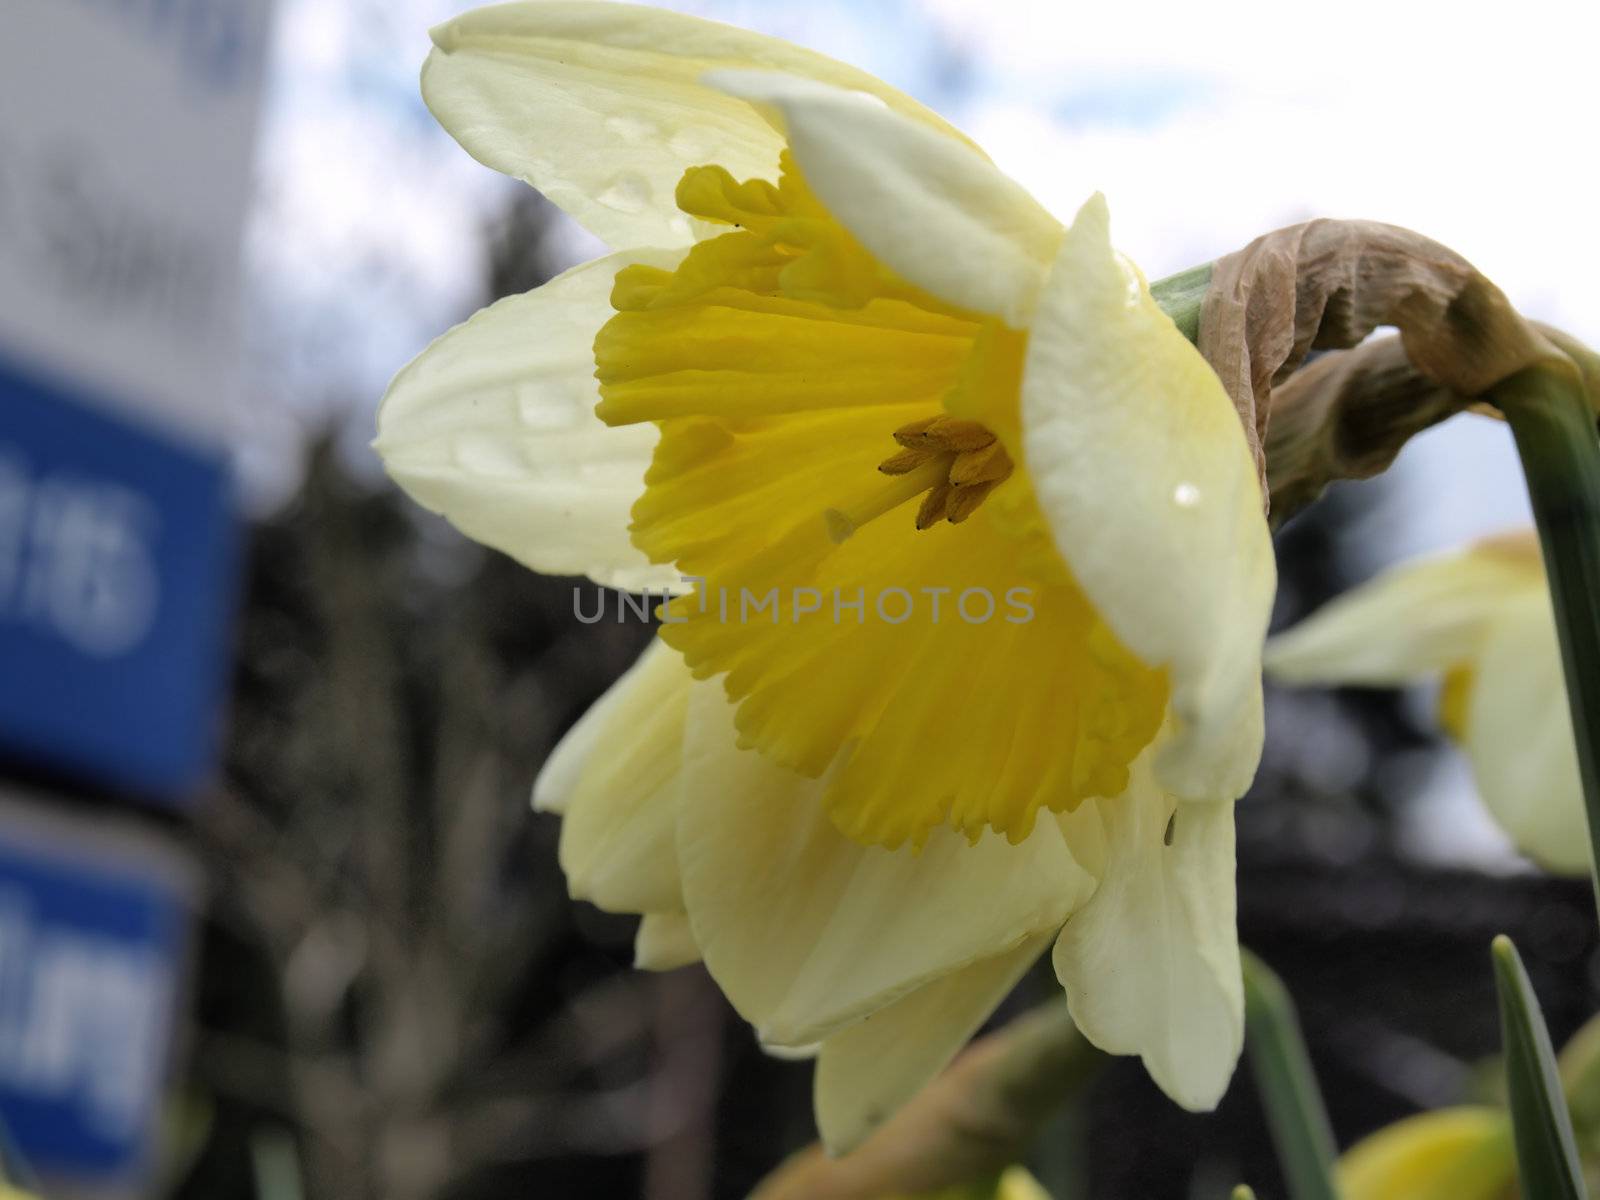 A yellow daffodil sags as raindrops gather on the petals. Urban exterior shot.